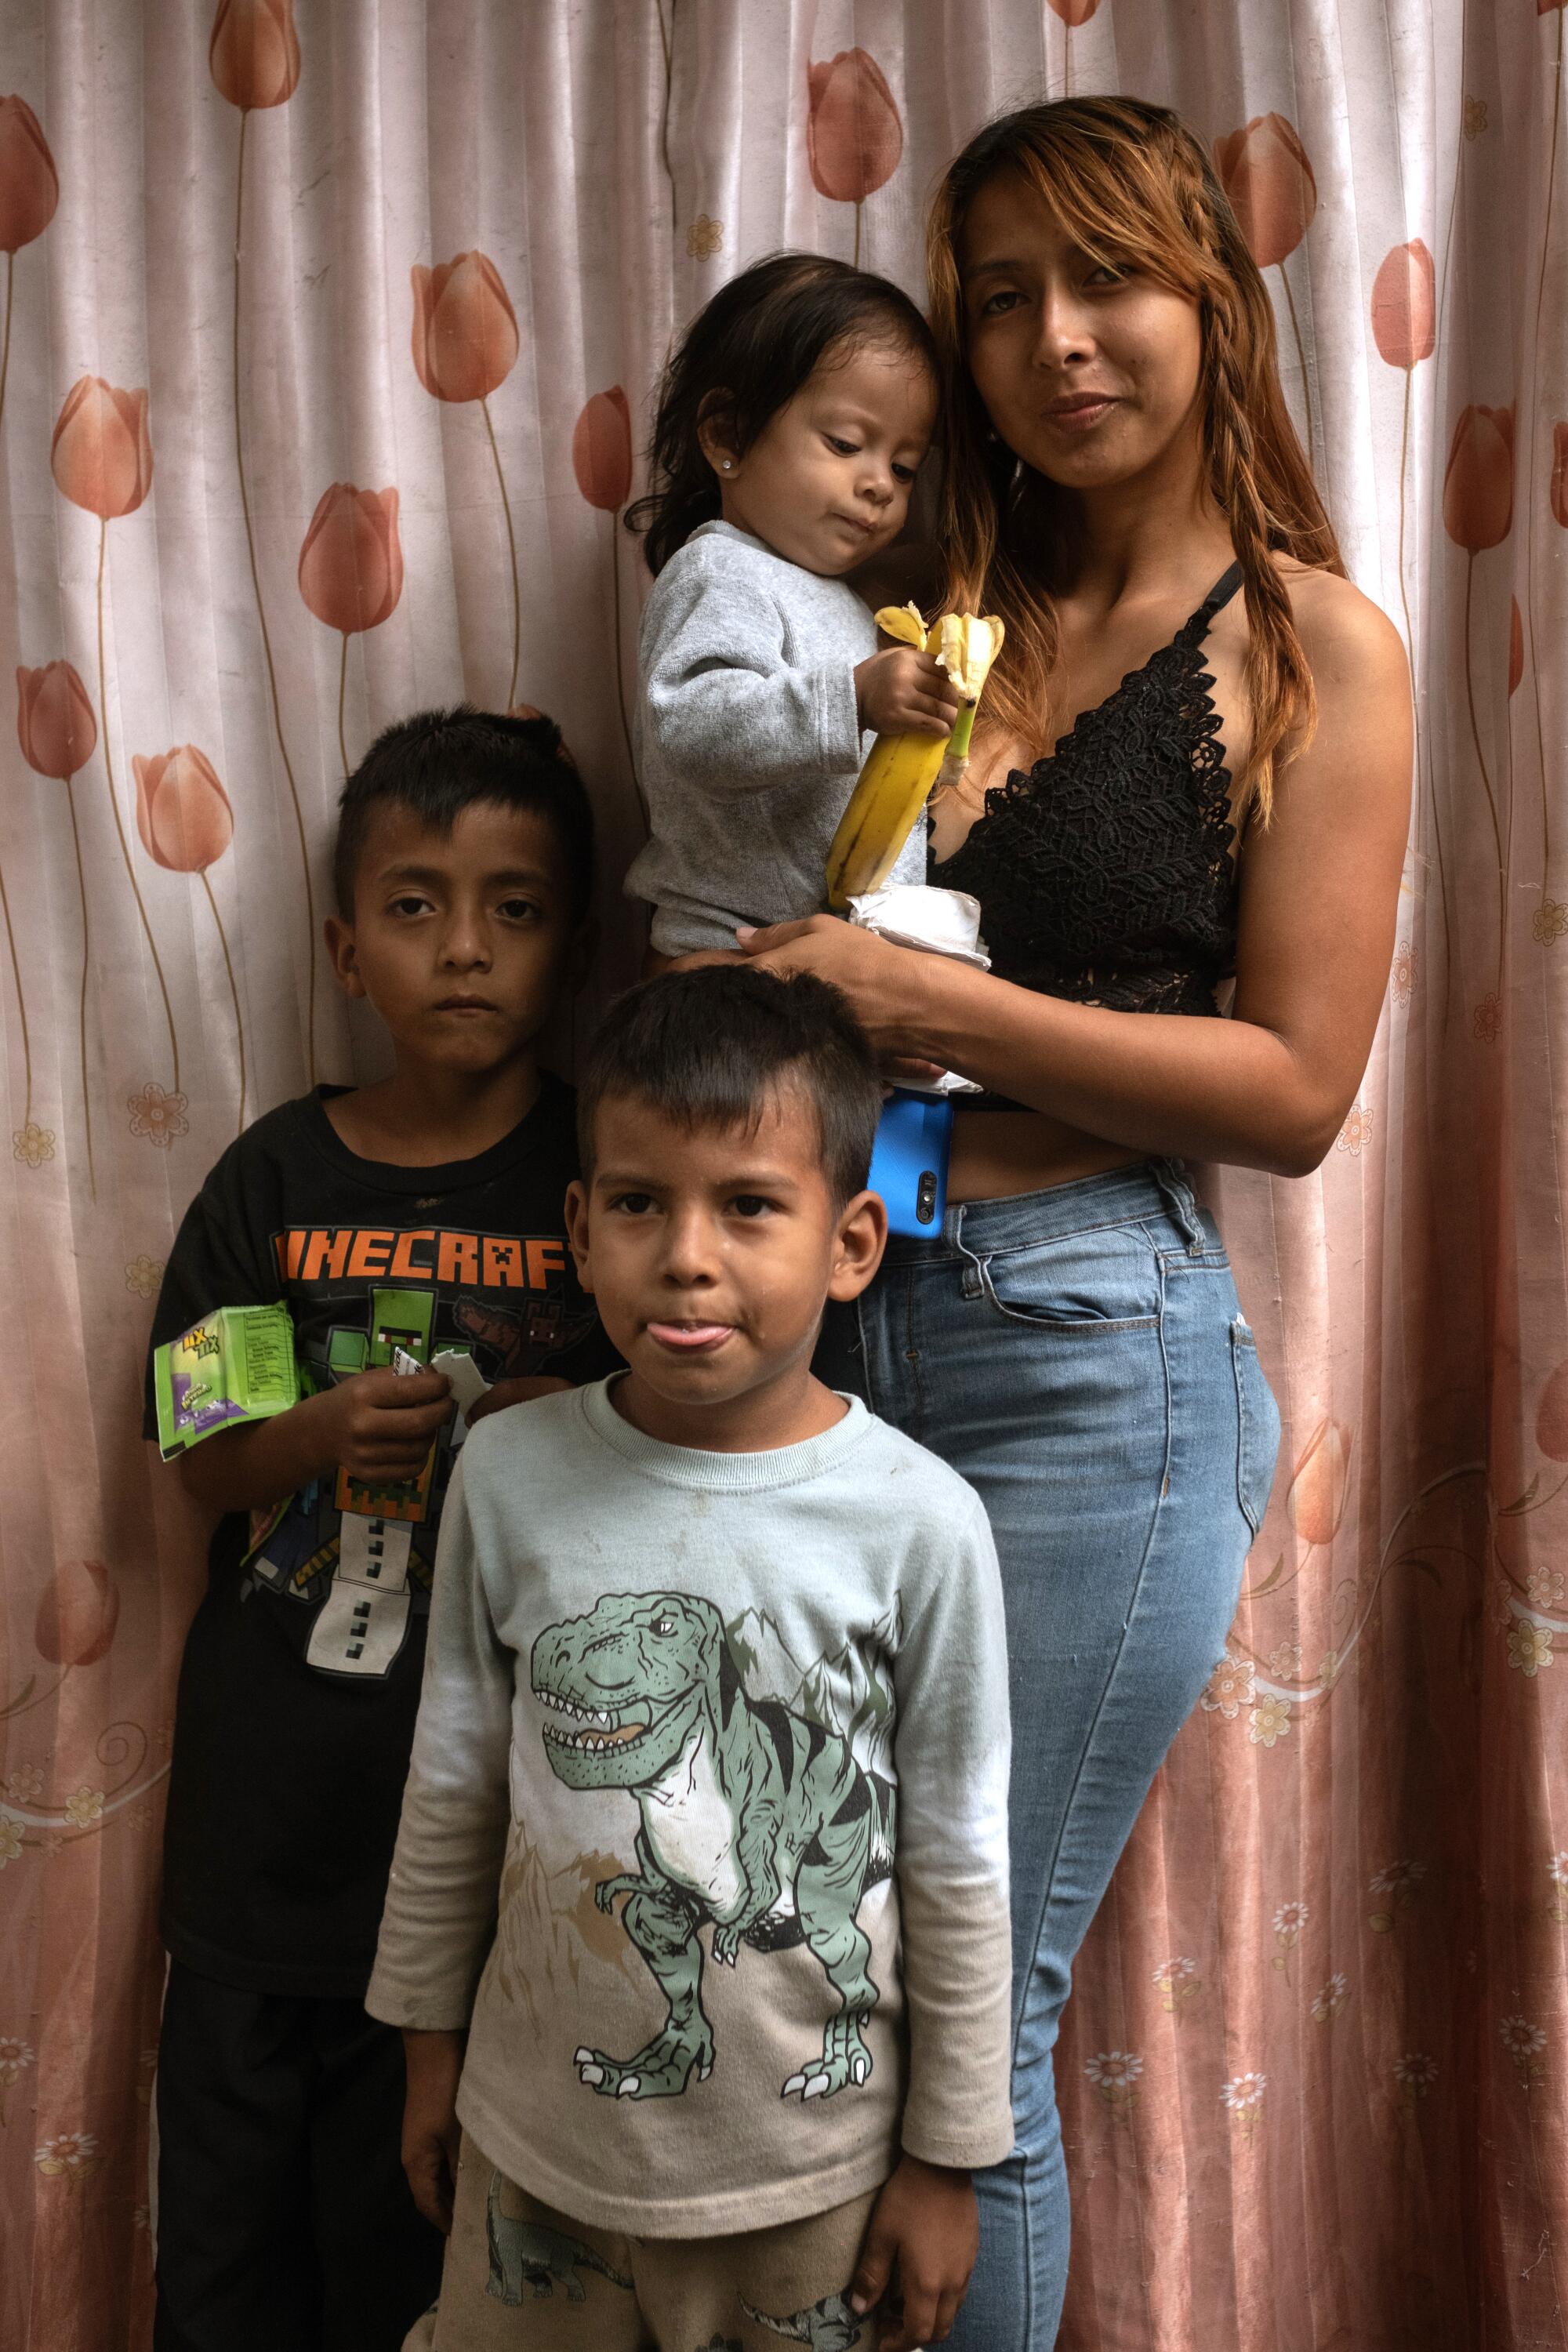 Keyla Arriaga, 23, is traveling with her three children -Dylan, Ryan and Dana- on the run